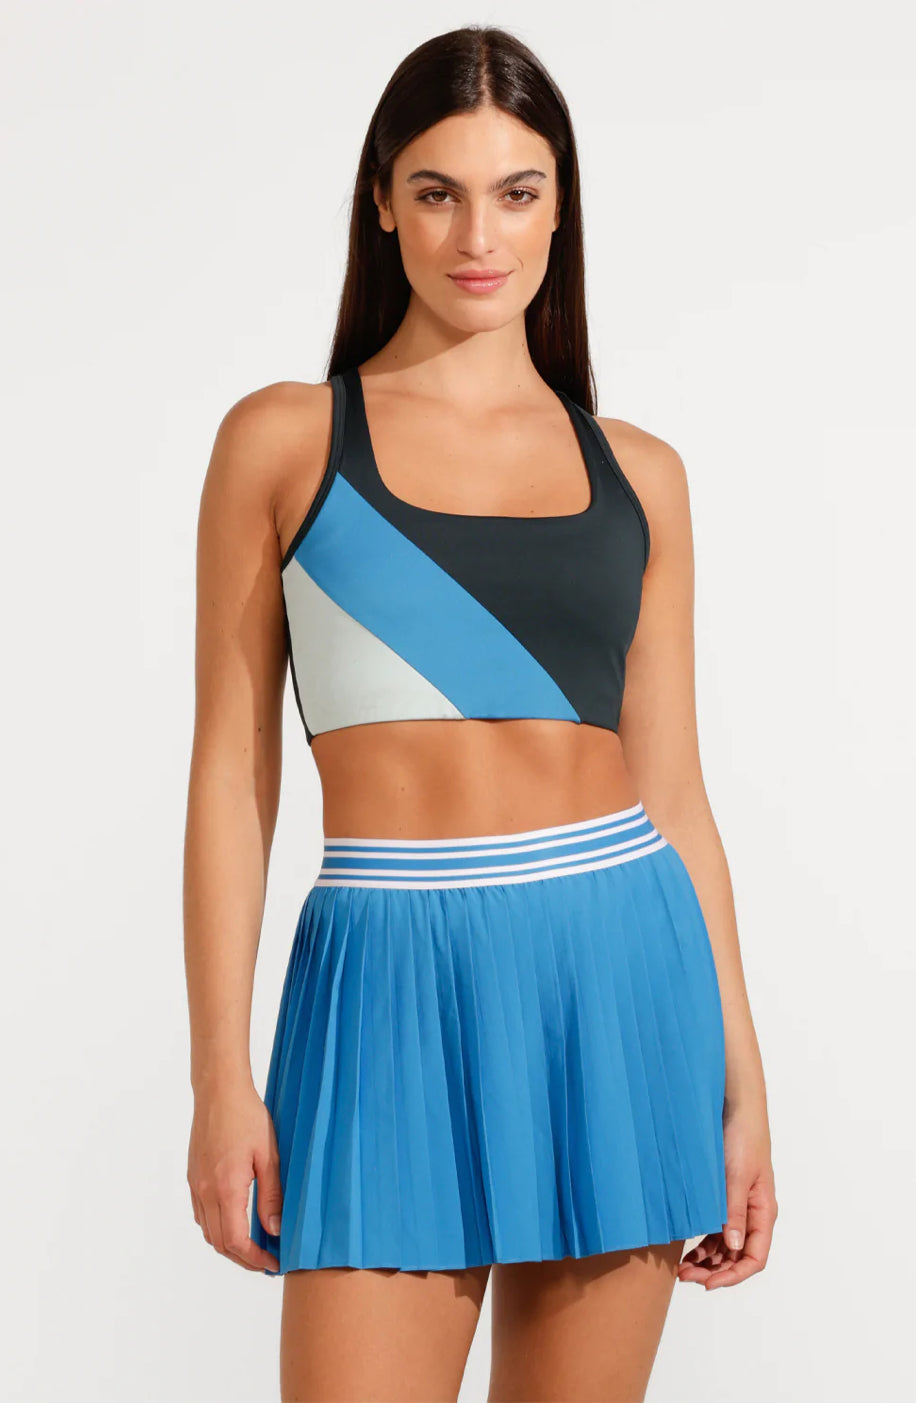 Eleven by Venus Williams Candy Dreams Tennis Skirt